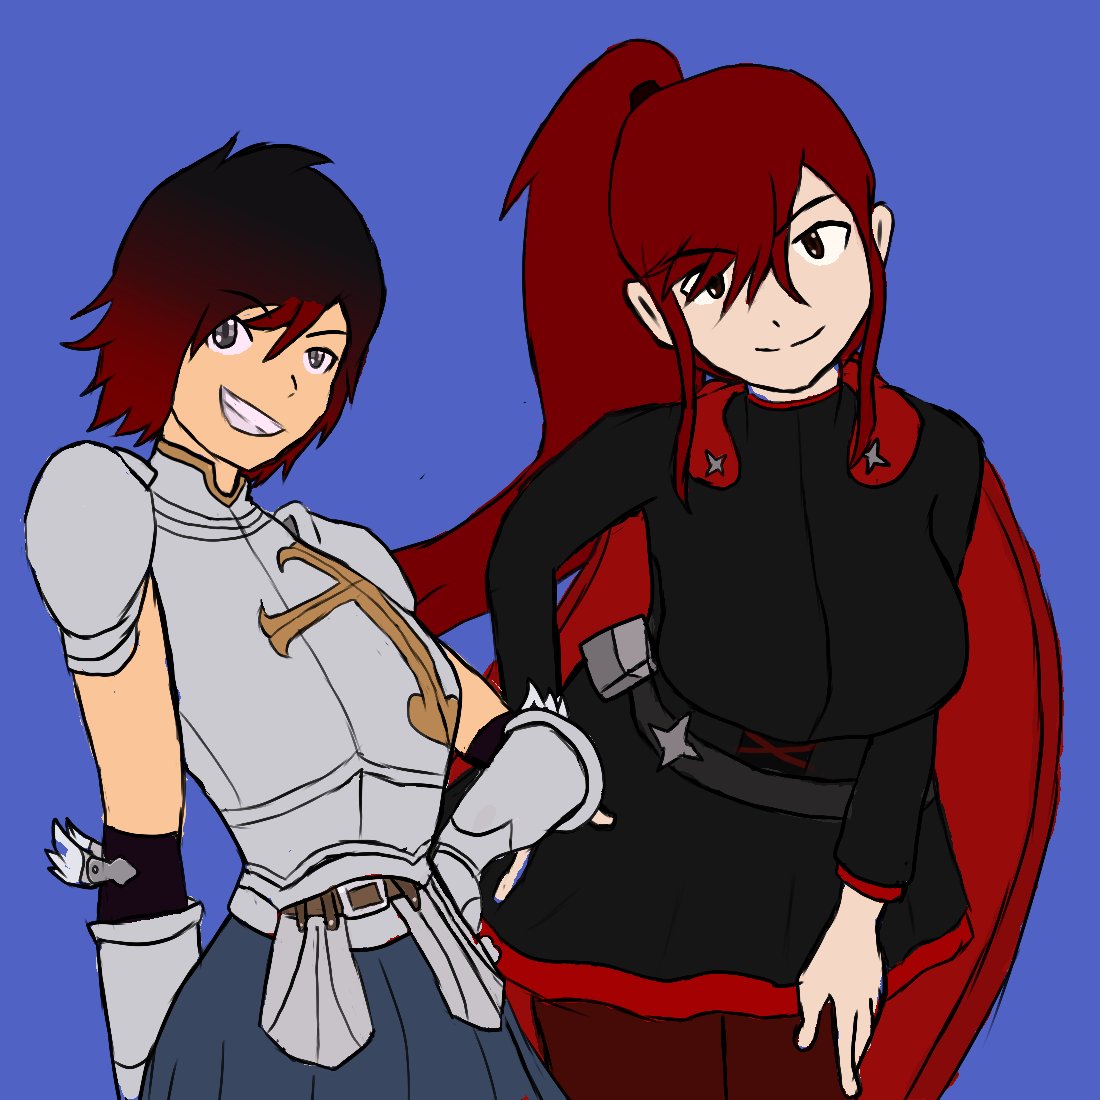 A fun drawing while I'm working on my Crossover Fic of RWBY X Fairytail 

The Red Girls (and my Favorite Girls), Ruby, and Erza in each other's (original) outfits

I might work on Weiss and Lucy later

#RWBY #FairyTail #RubyRose #ErzaScarlet #RWBYFanart #Crossover